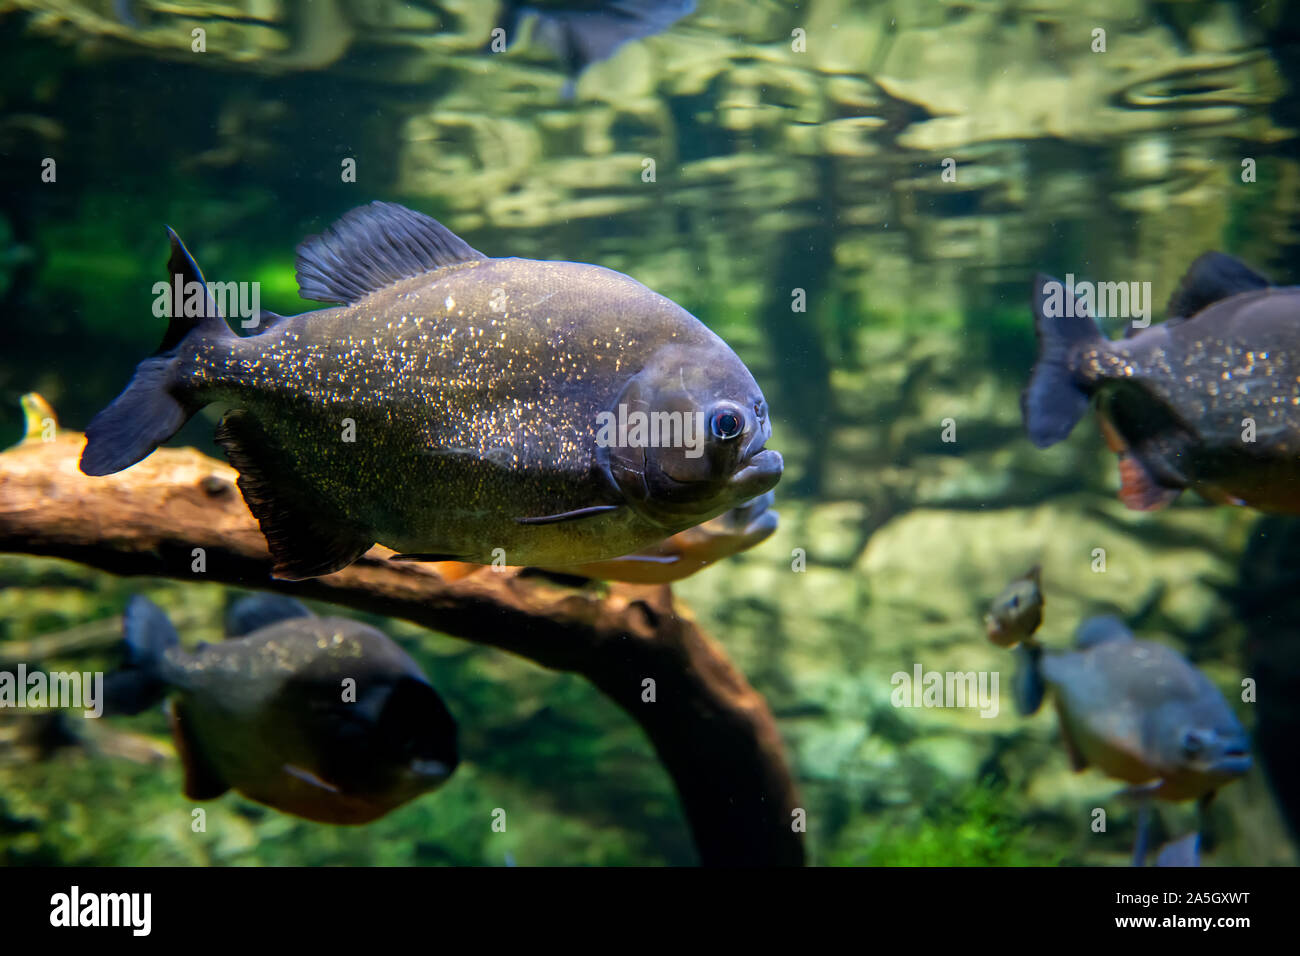 Tropical piranha fishes in a natural environment Stock Photo